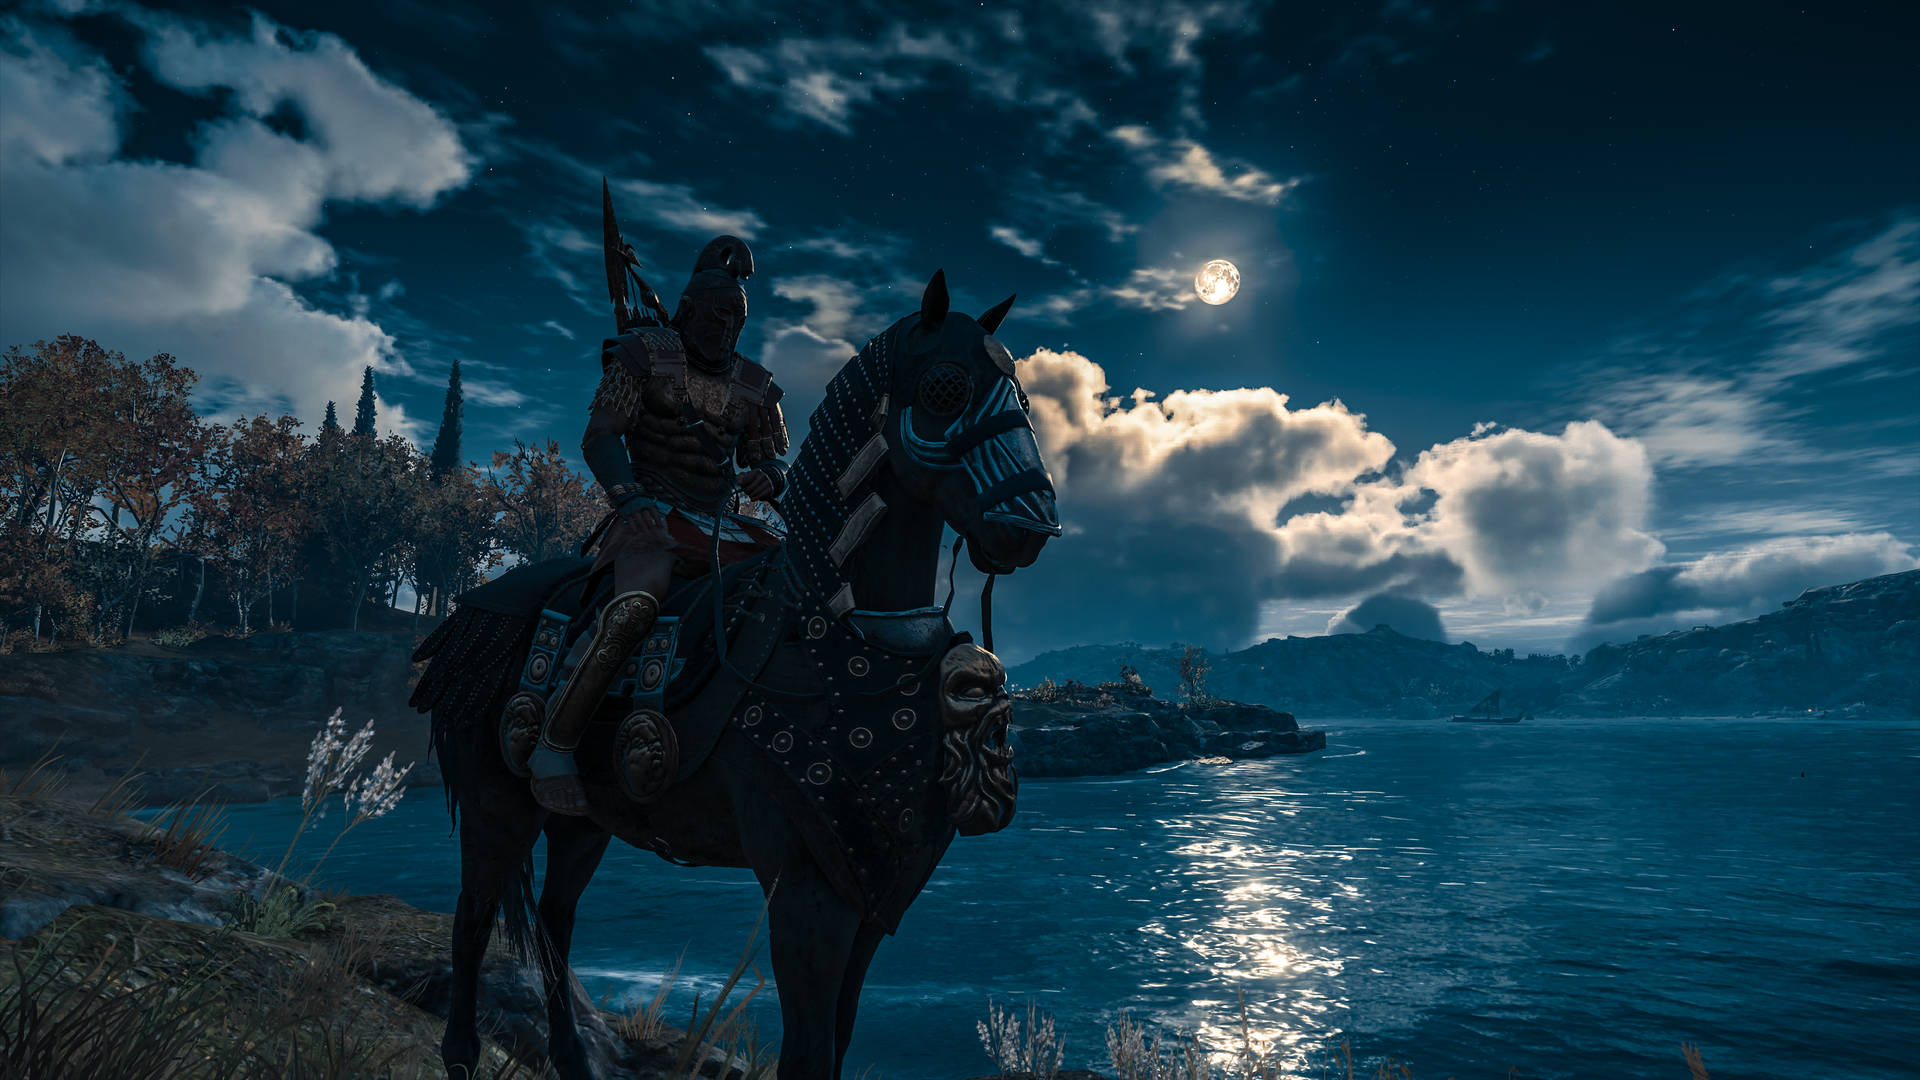 Assassin's Creed Odyssey Spartan Riding Horse Background